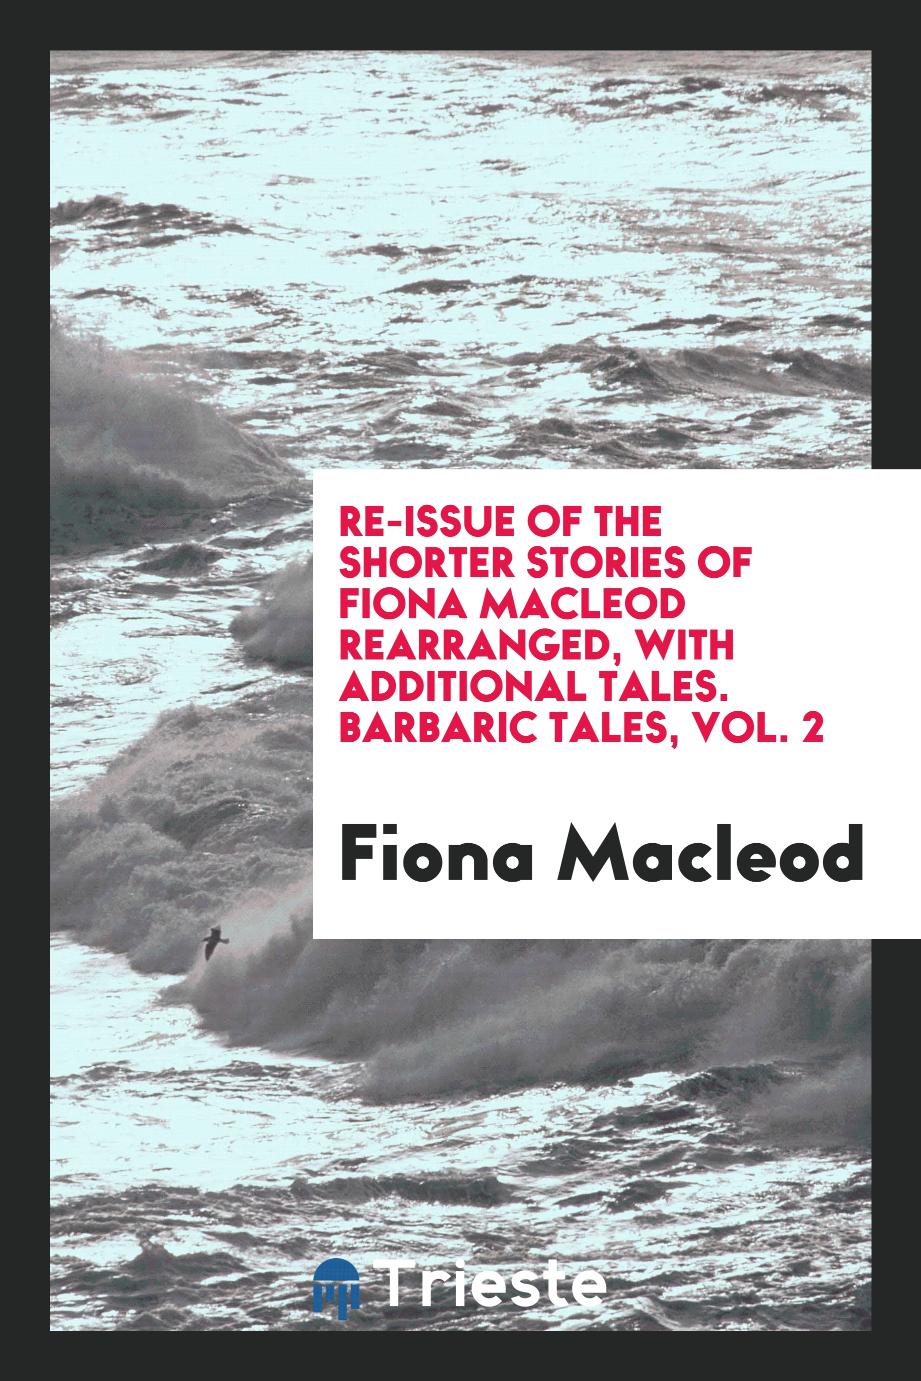 Re-issue of the shorter stories of Fiona Macleod rearranged, with additional tales. Barbaric tales, Vol. 2